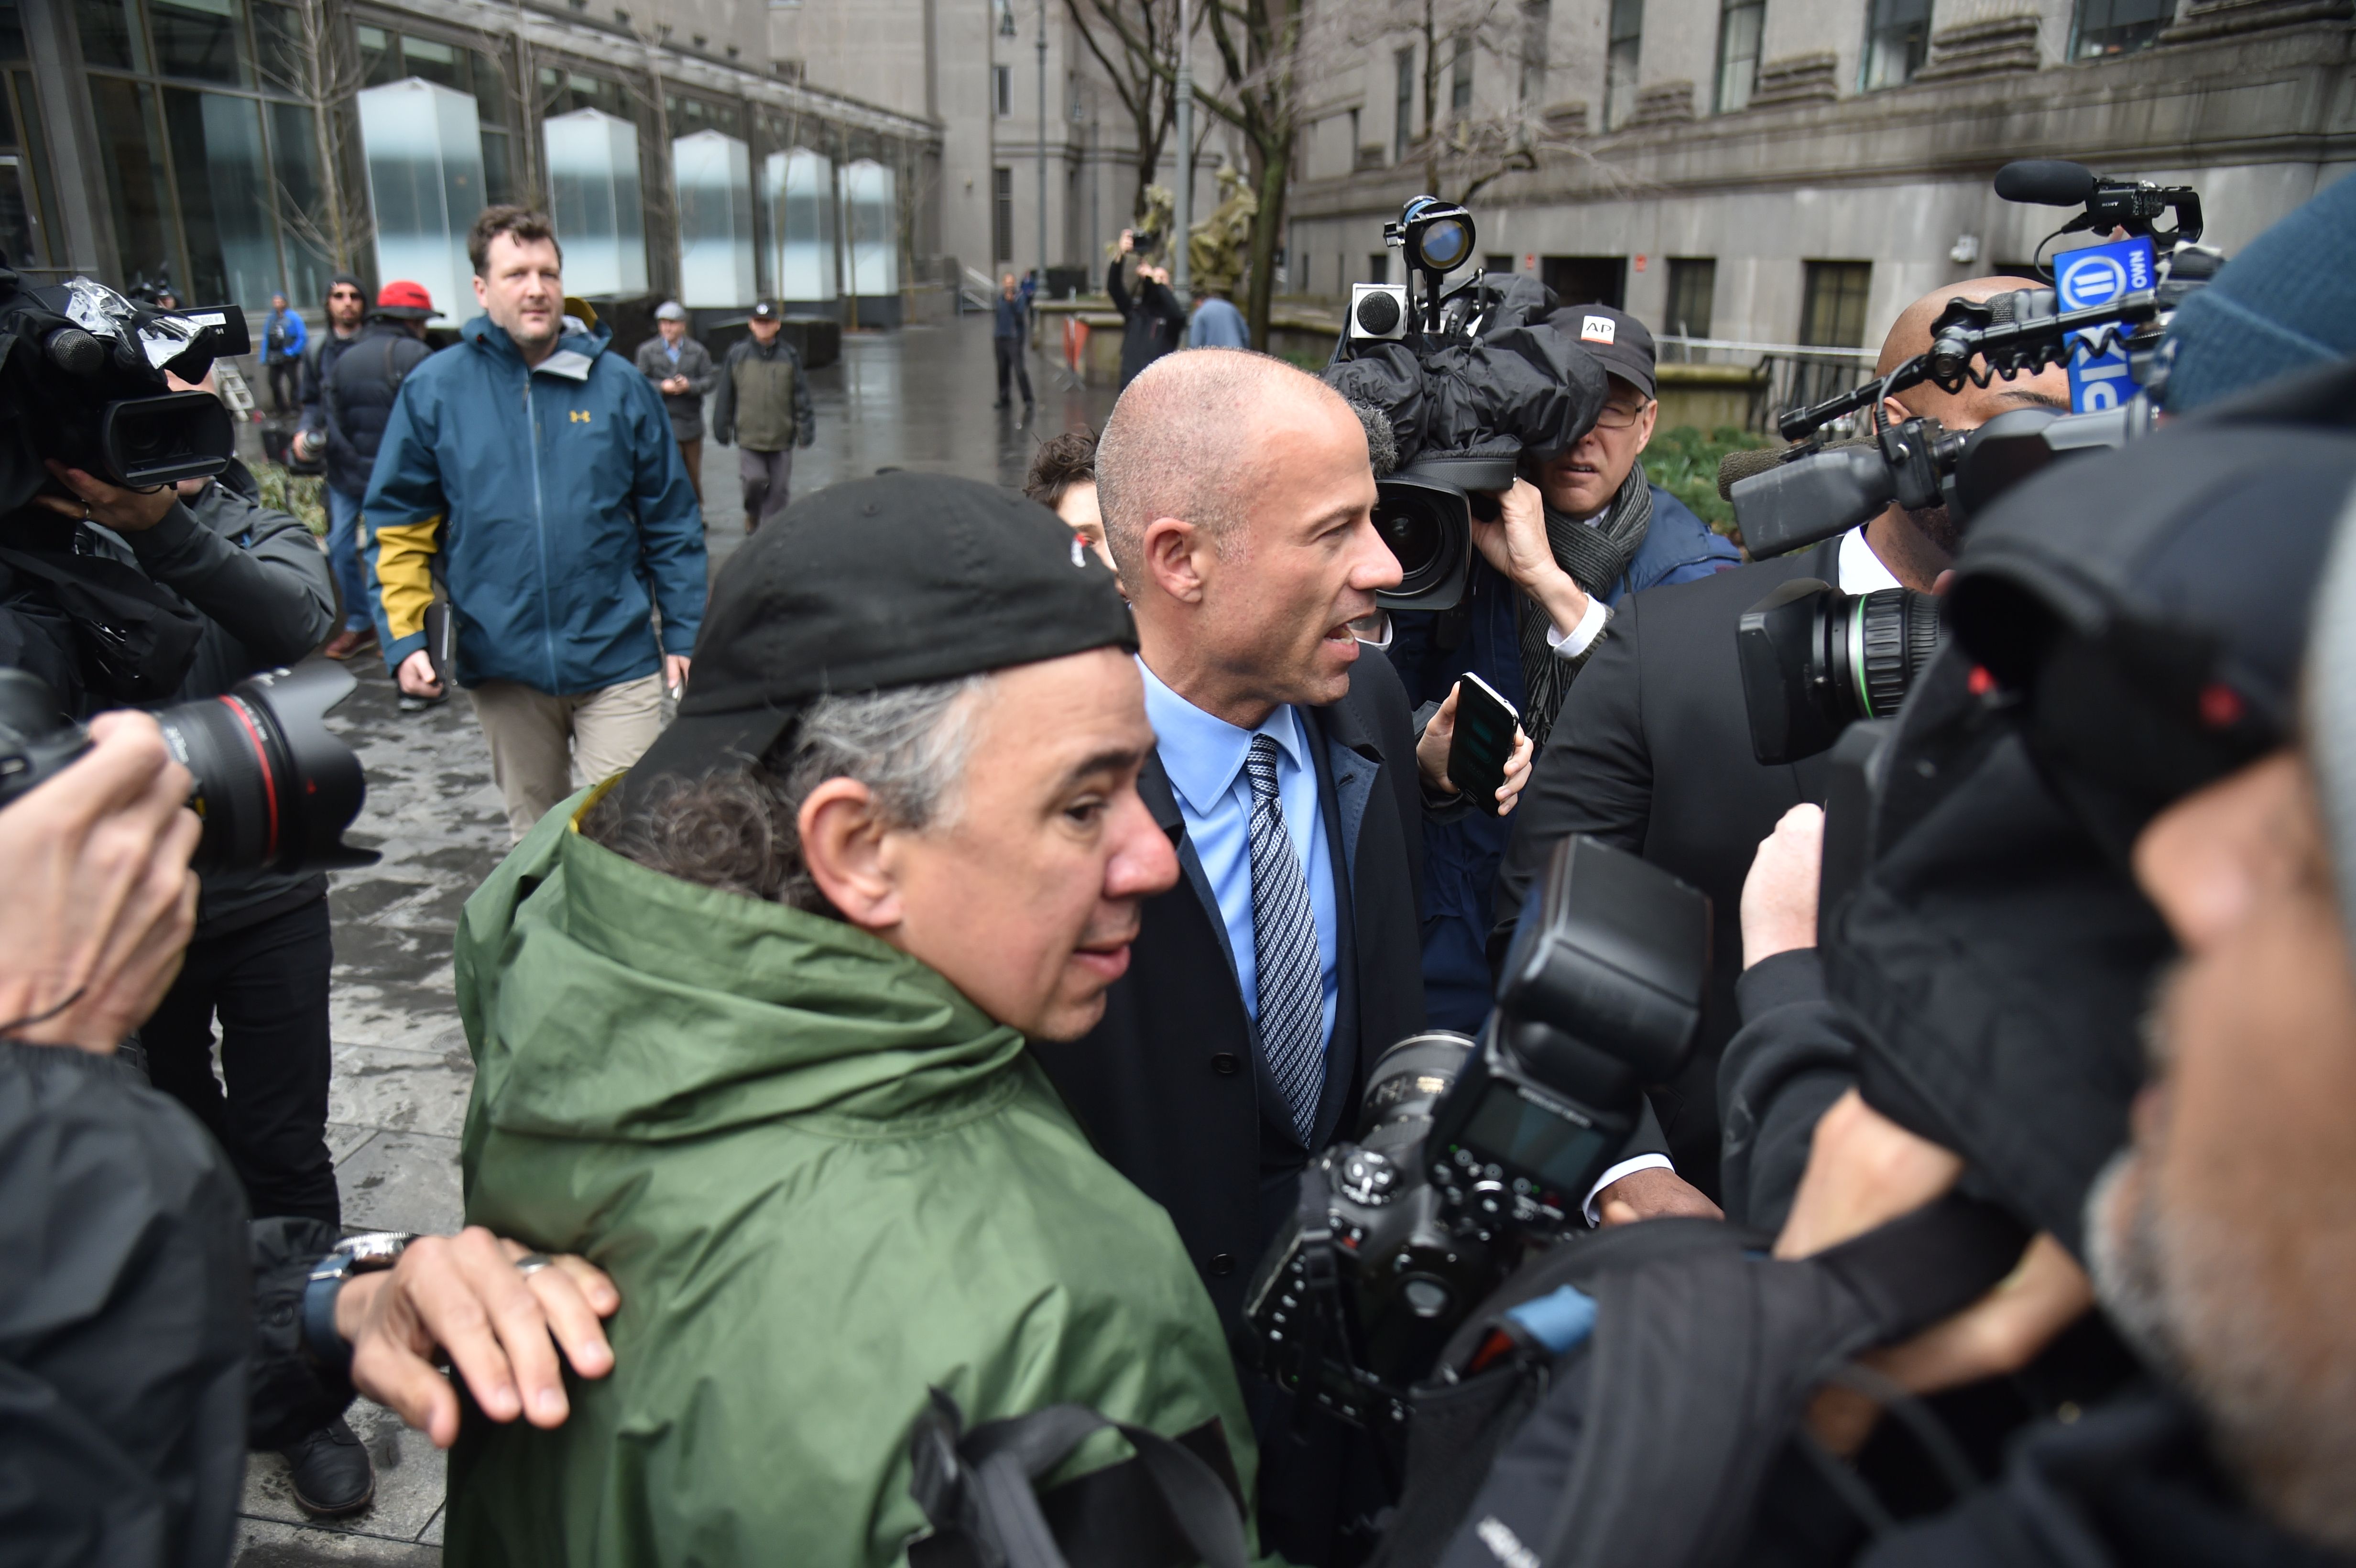 Attorney for Stormy Daniels, Michael Avenatti(C), arrives for a court hearing at the US Courthouse in New York on April 16, 2018. President Donald Trump's personal lawyer Michael Cohen has been under criminal investigation for months over his business dealings, and FBI agents last week raided his home, hotel room, office, a safety deposit box and seized two cellphones. (HECTOR RETAMAL/AFP/Getty Images)